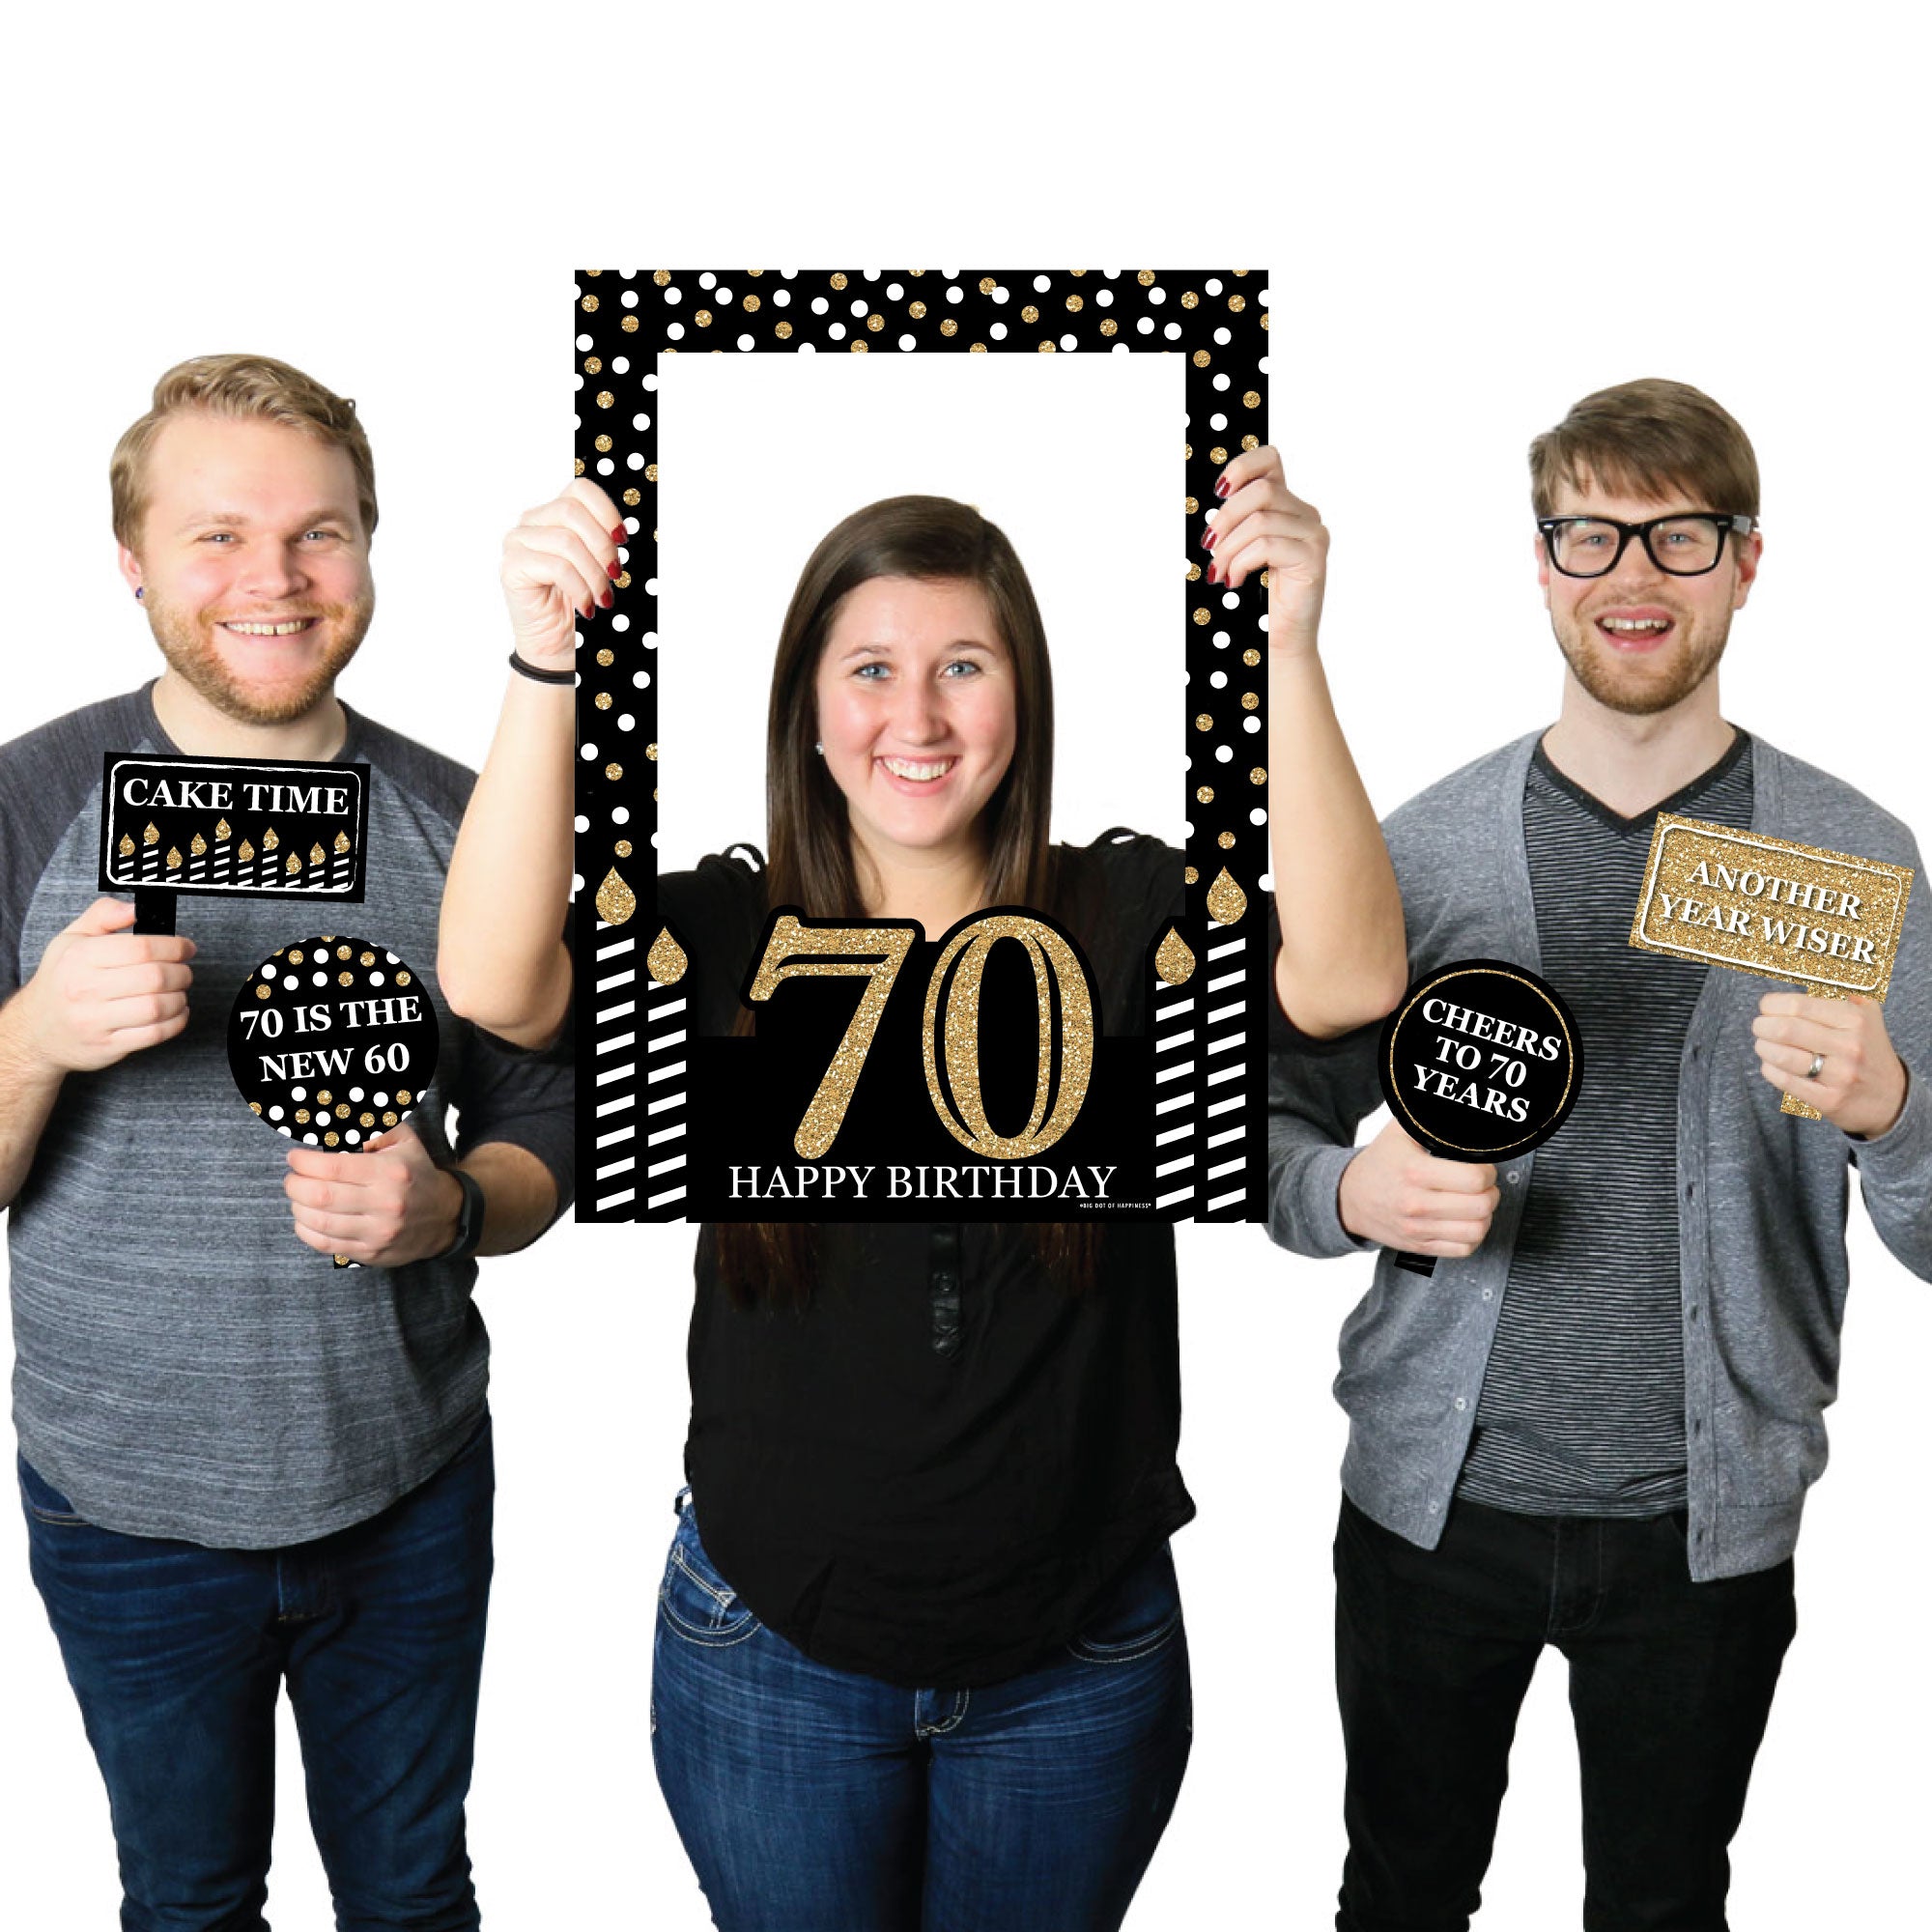 DIY - NEW YEAR Photo Booth Prop Frame UNDER $3, Dollar Tree selfie booth